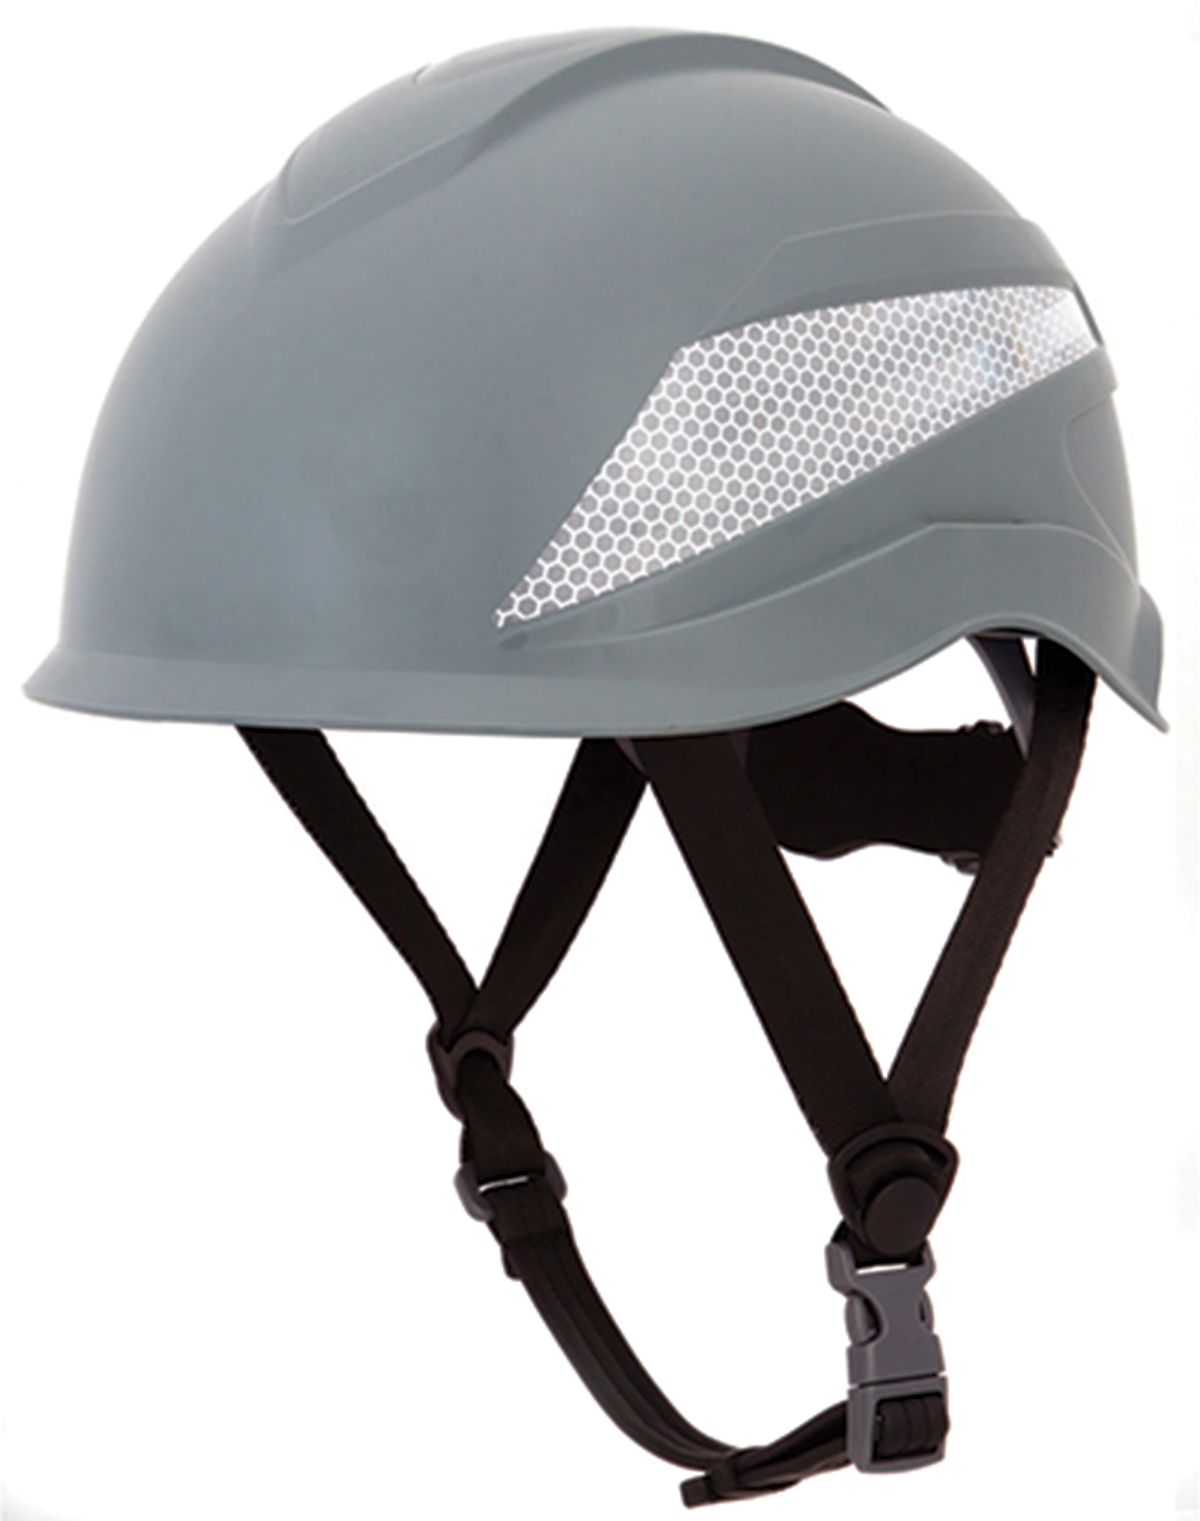 safety helmet provides high impact and heat resistance